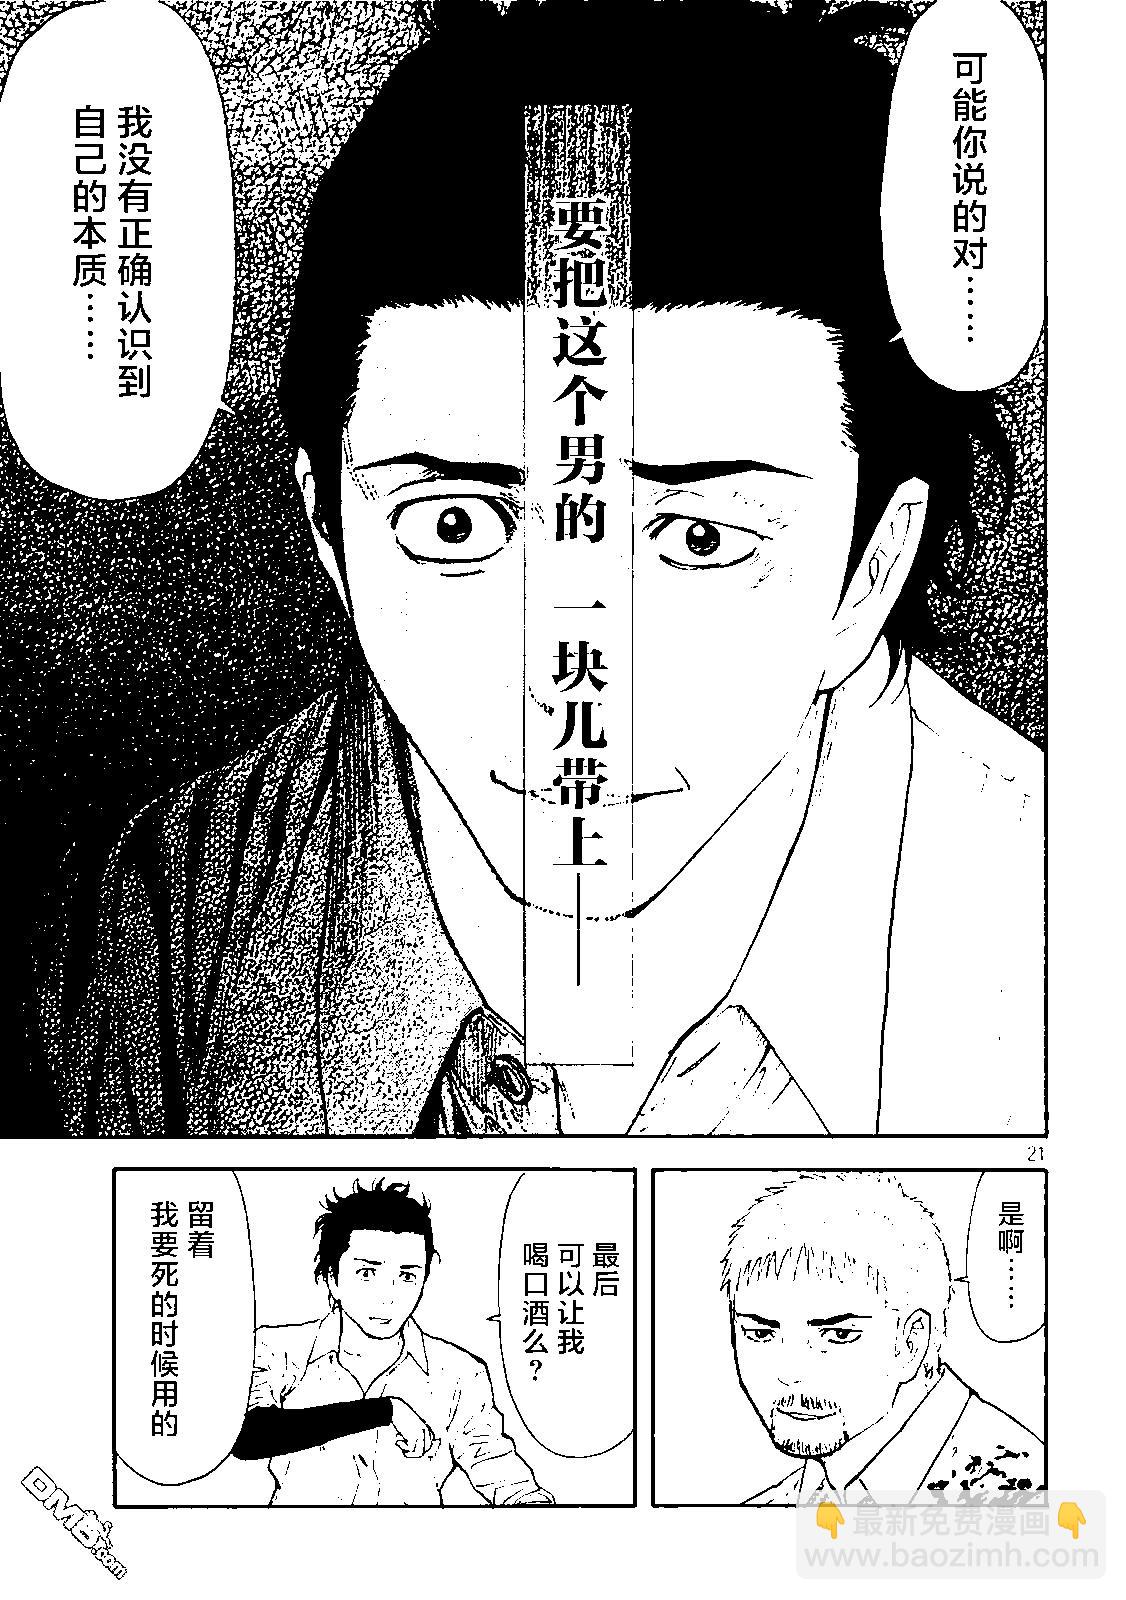 MY HOME HERO - 第146話 兩人的對話 - 1